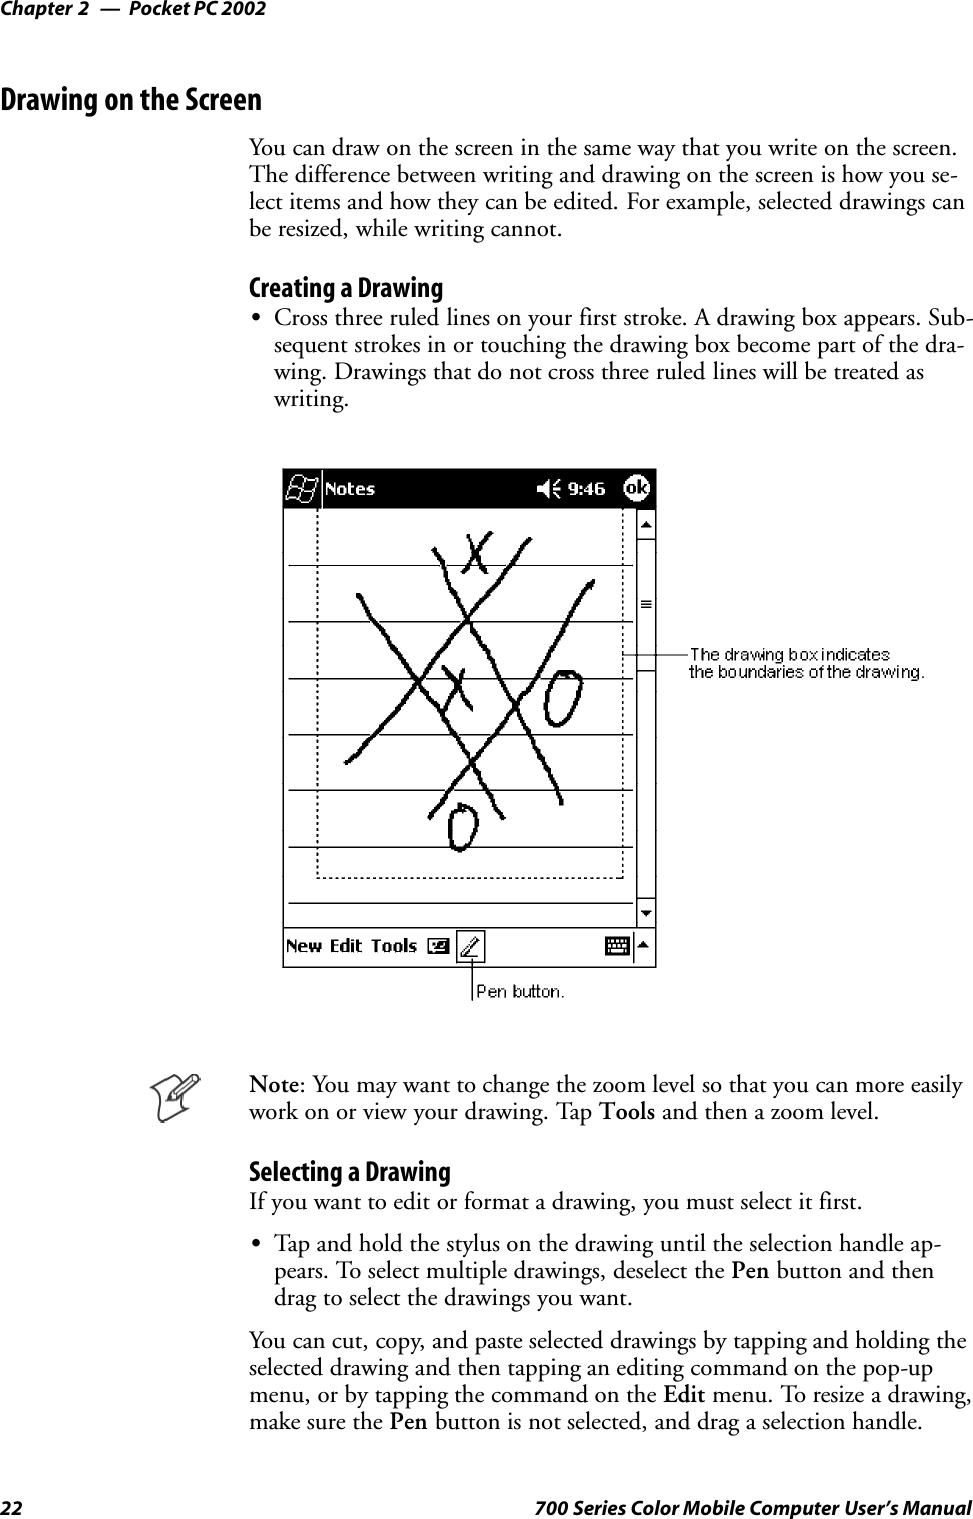 Pocket PC 2002Chapter —222 700 Series Color Mobile Computer User’s ManualDrawing on the ScreenYou can draw on the screen in the same way that you write on the screen.The difference between writing and drawing on the screen is how you se-lect items and how they can be edited. For example, selected drawings canbe resized, while writing cannot.Creating a DrawingSCross three ruled lines on your first stroke. A drawing box appears. Sub-sequent strokes in or touching the drawing box become part of the dra-wing. Drawings that do not cross three ruled lines will be treated aswriting.Note: You may want to change the zoom level so that you can more easilywork on or view your drawing. Tap Tools and then a zoom level.Selecting a DrawingIf you want to edit or format a drawing, you must select it first.STap and hold the stylus on the drawing until the selection handle ap-pears. To select multiple drawings, deselect the Pen button and thendrag to select the drawings you want.You can cut, copy, and paste selected drawings by tapping and holding theselected drawing and then tapping an editing command on the pop-upmenu, or by tapping the command on the Edit menu. To resize a drawing,make sure the Pen button is not selected, and drag a selection handle.